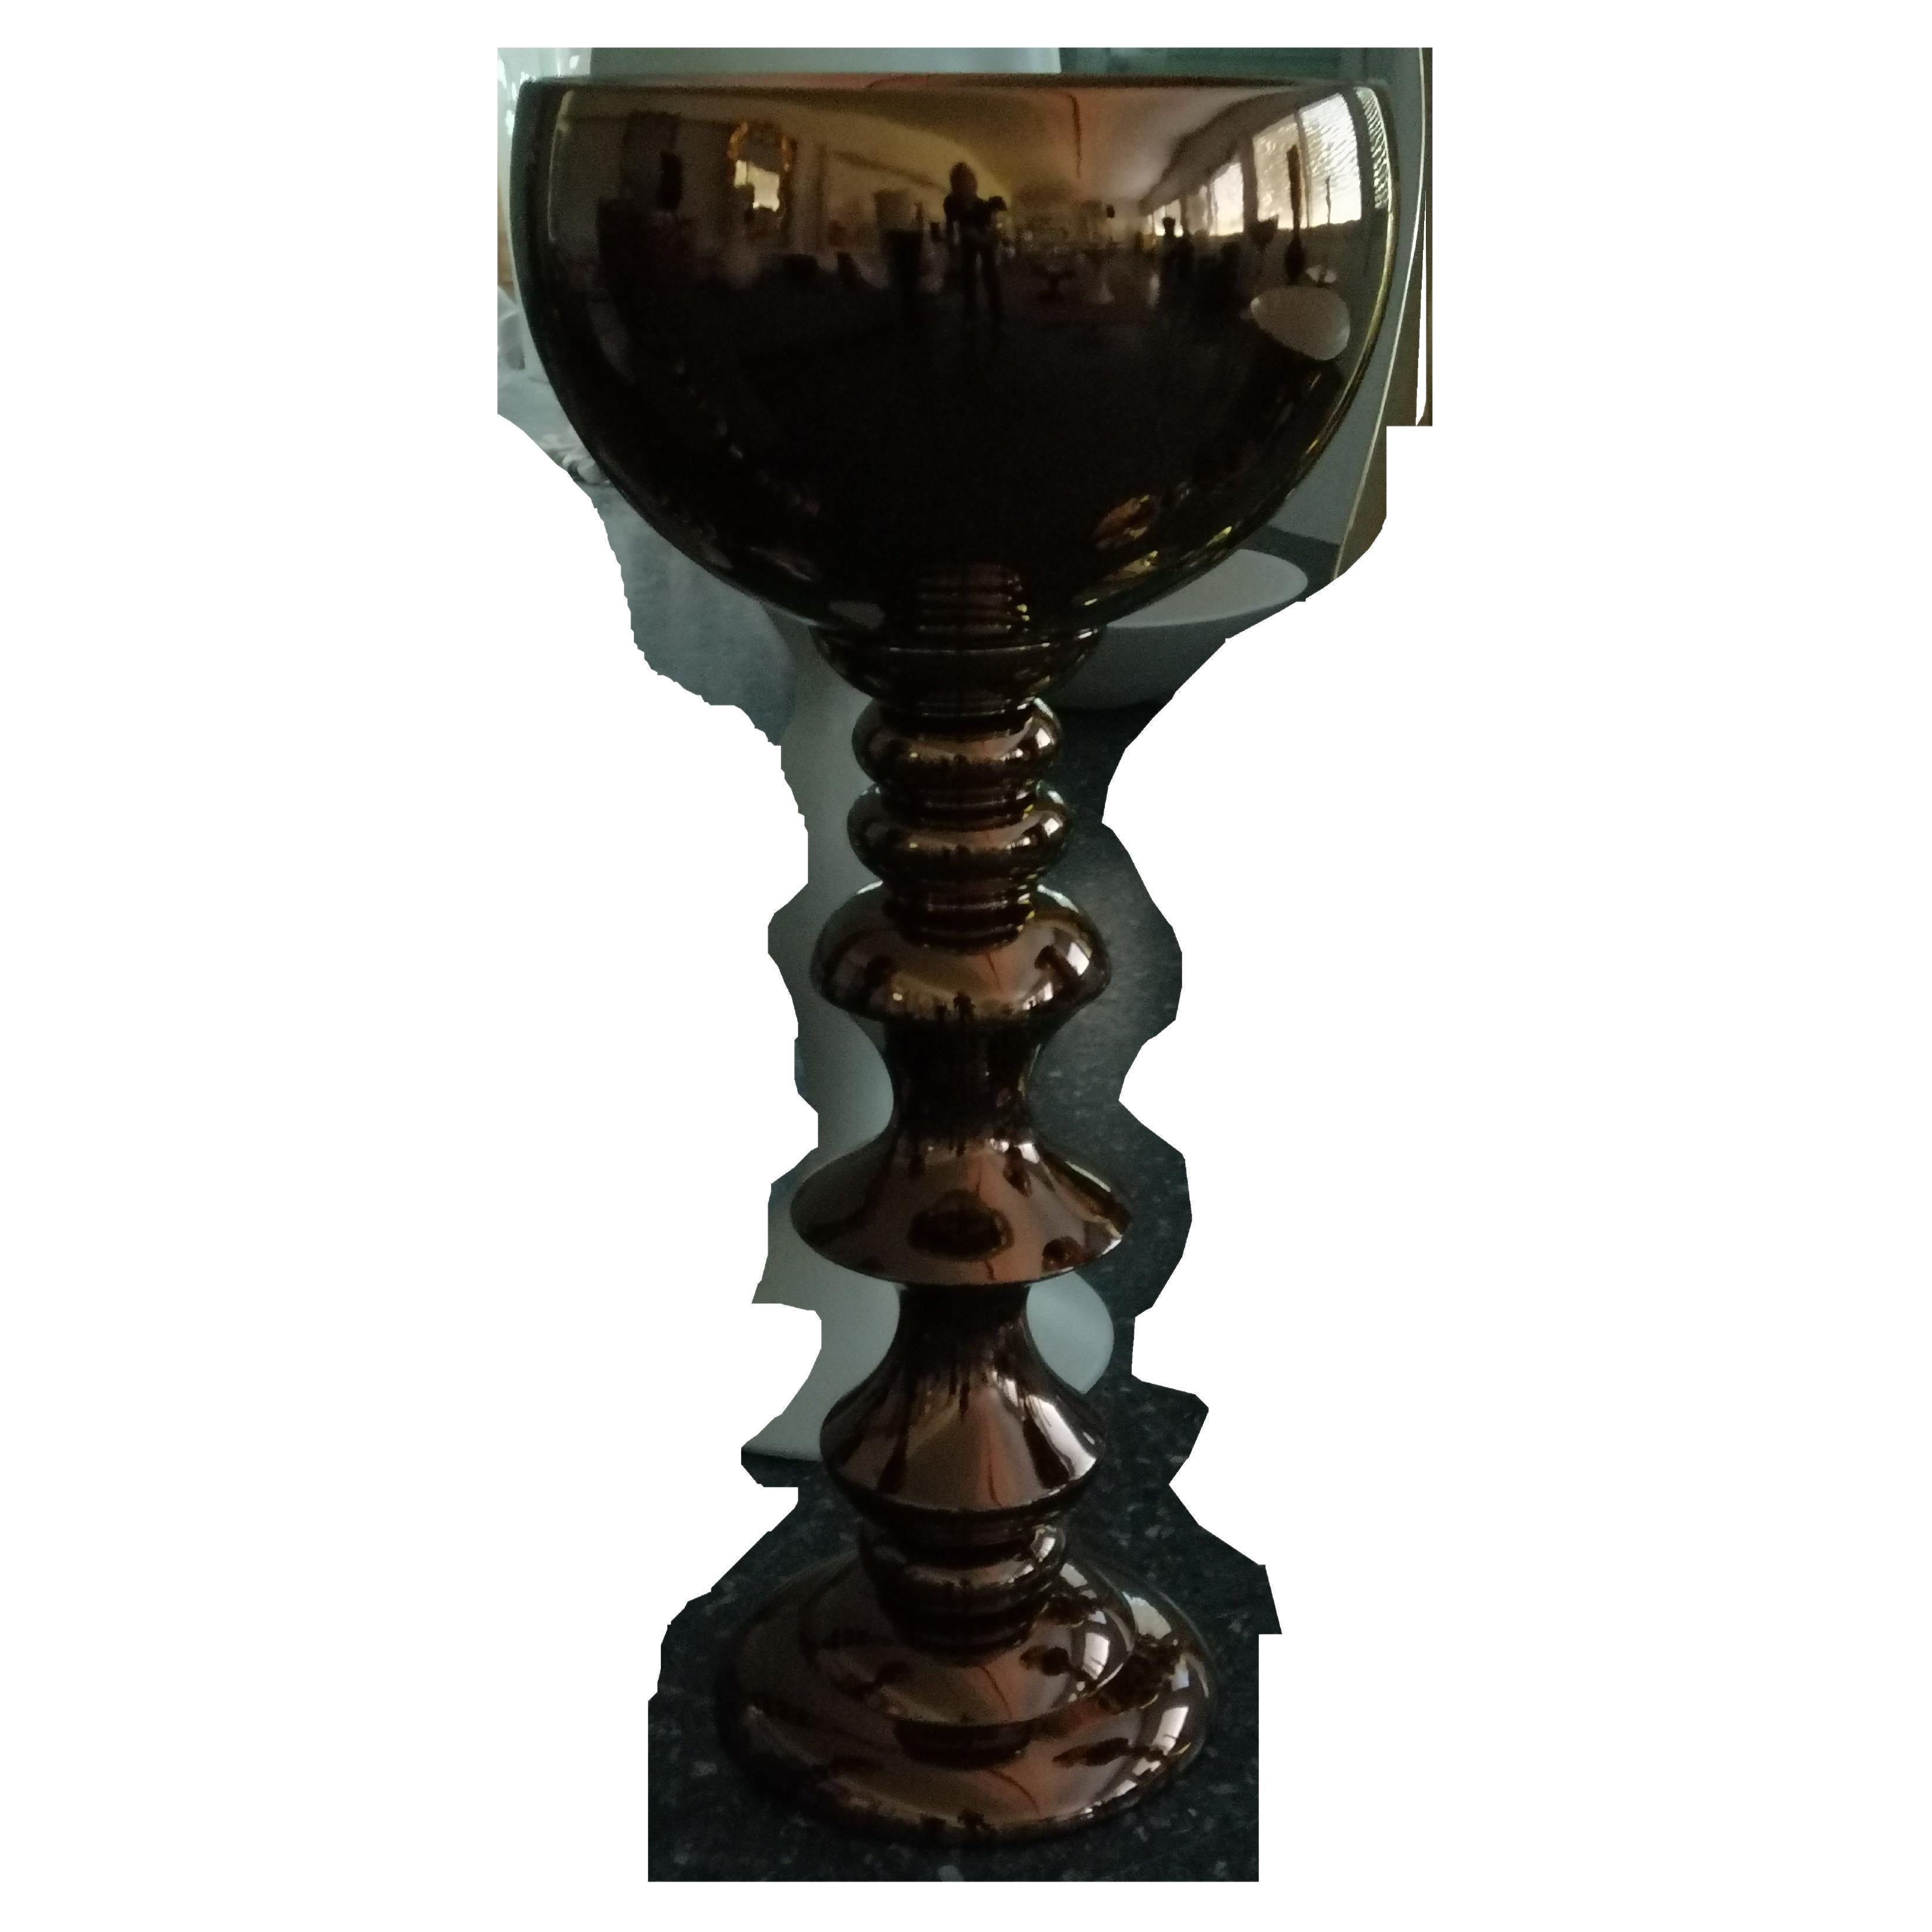 Ceramic Cup MIDA3 handcrafted in bronze with bowl leopard pattern finished 
cod. CP003


measures: 
H. 105.0 cm.
Dm. 55.0 cm.